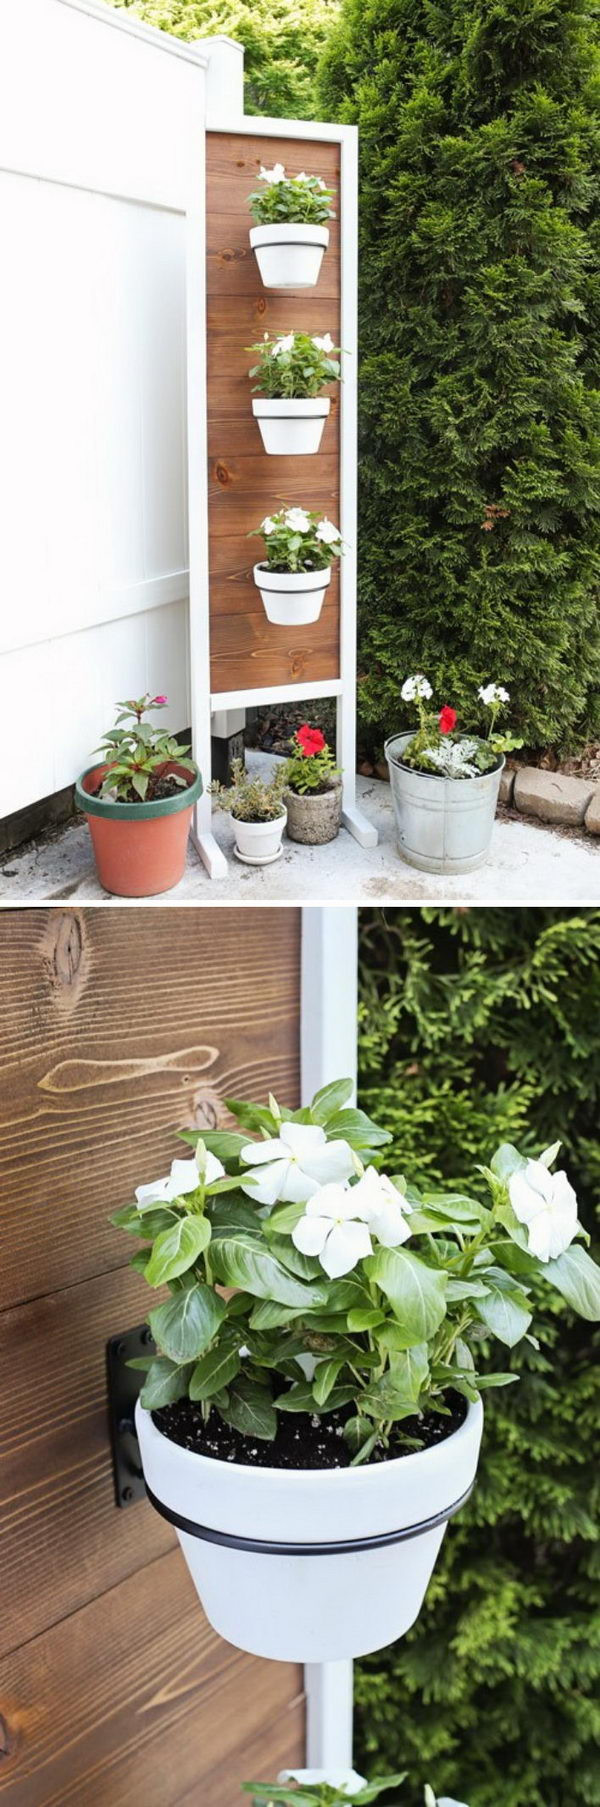 DIY Outdoor Plant Stand
 25 DIY Plant Stands With Thrift Store Finds Hative